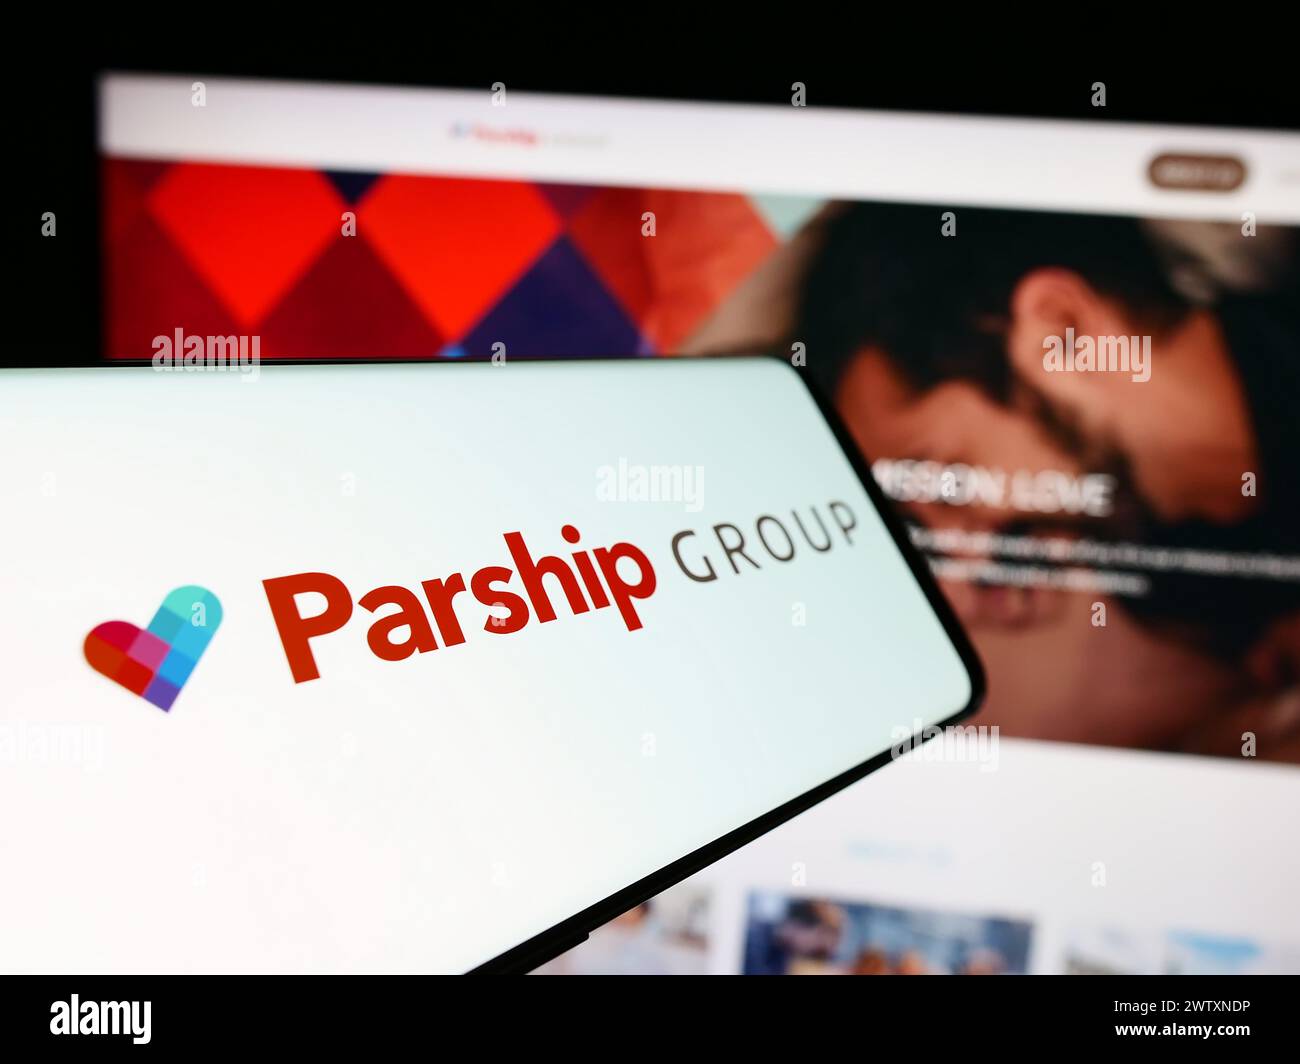 Cellphone with logo of German online dating company ParshipMeet Holding GmbH in front of business website. Focus on center-left of phone display. Stock Photo